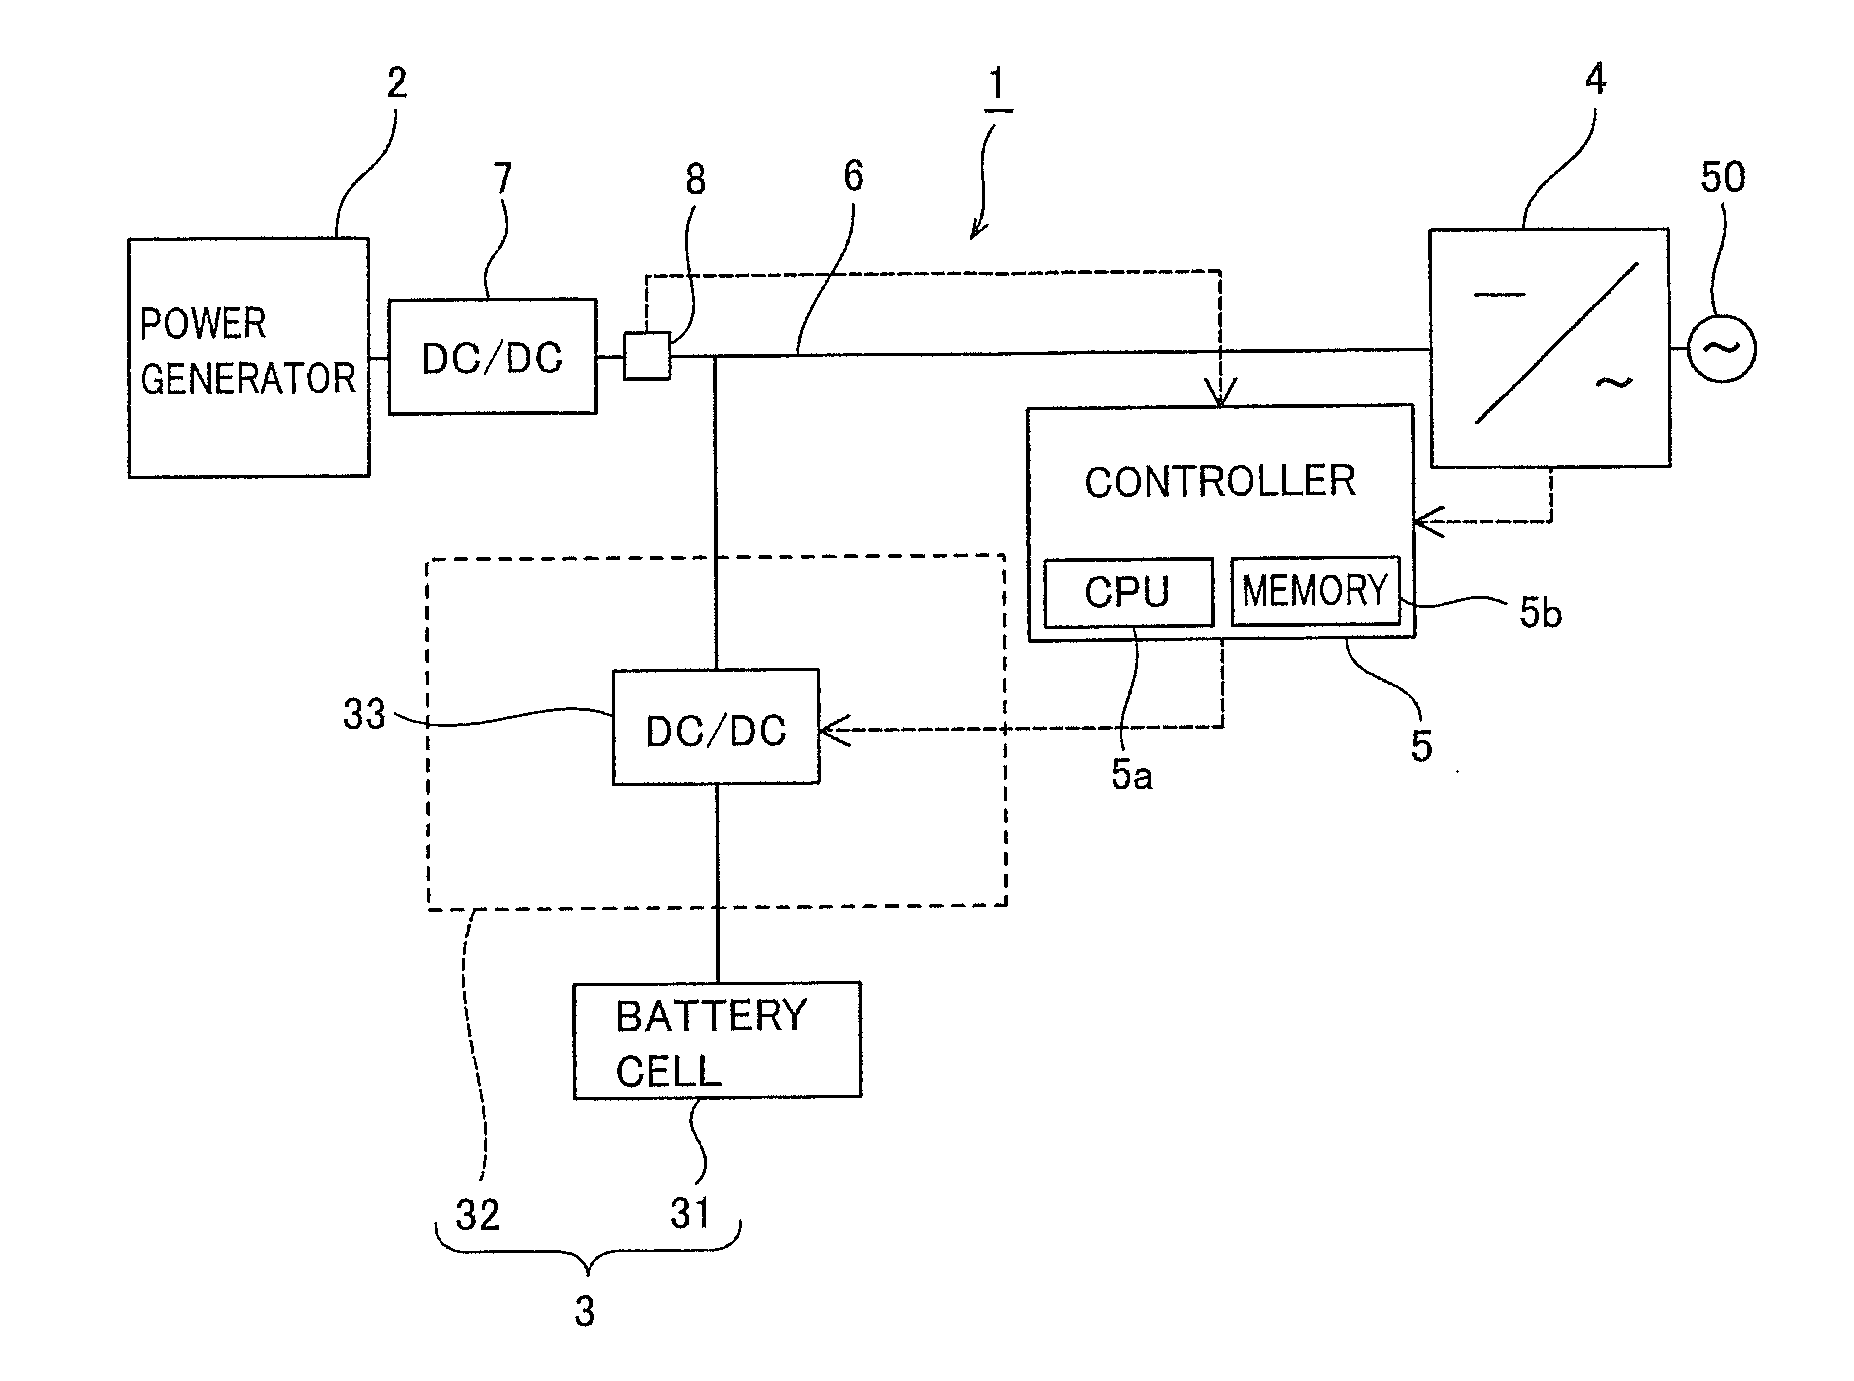 Charge/Discharge Control Device and Power Generation System